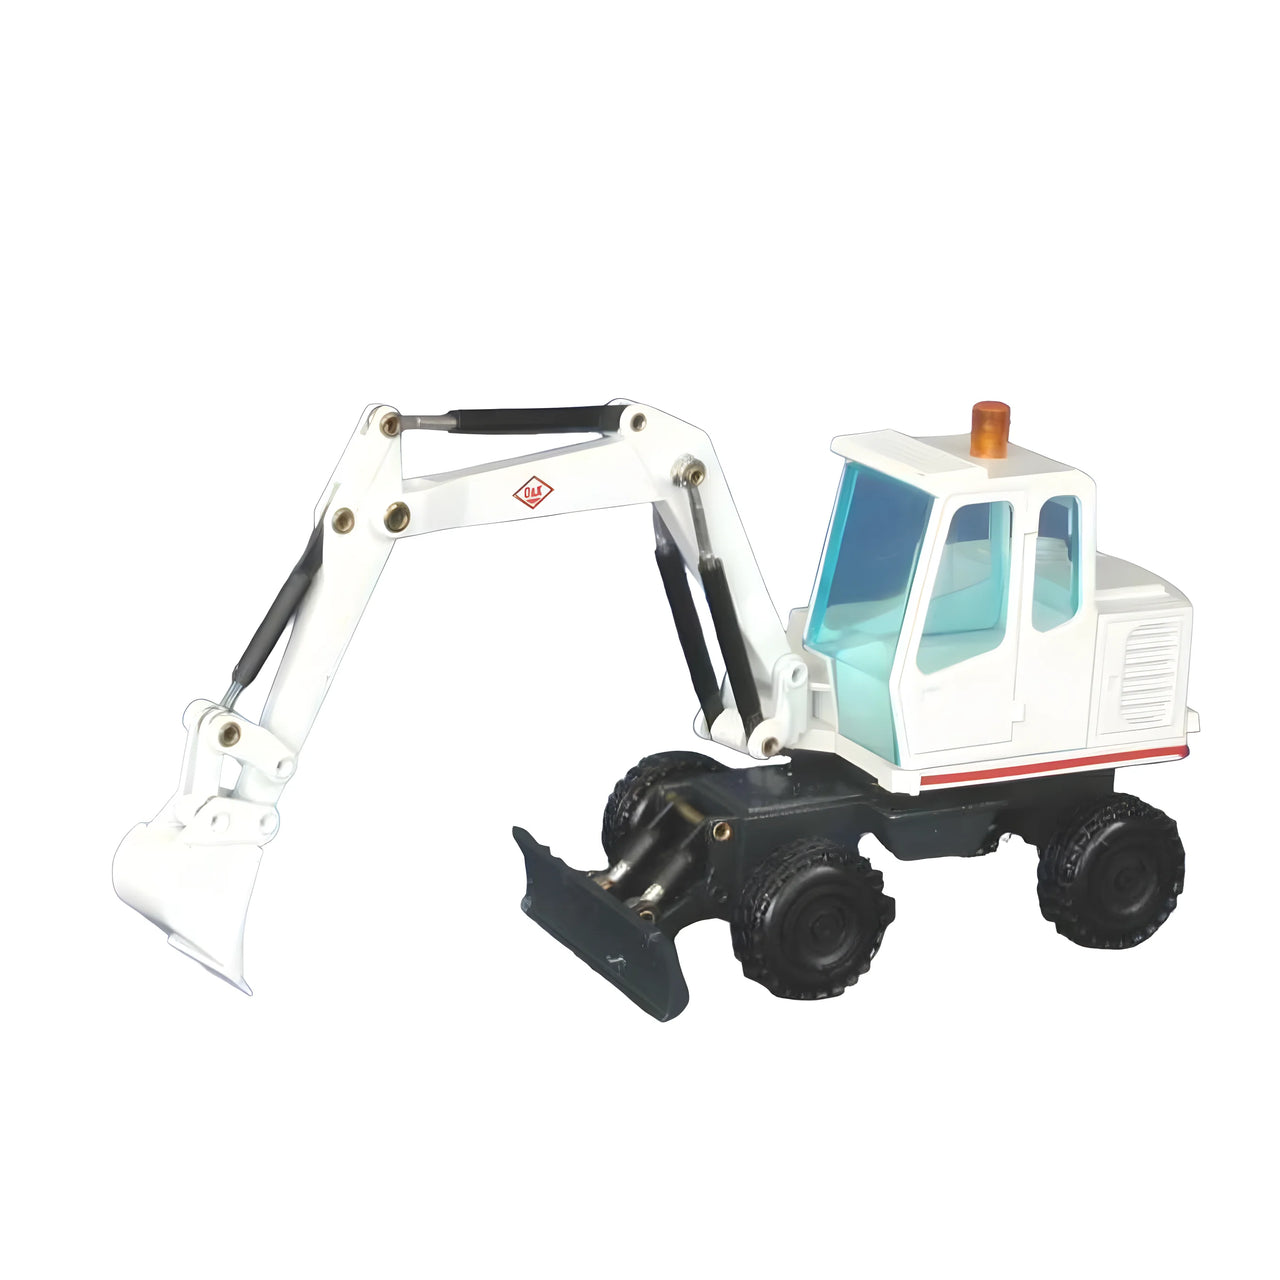 287.3 O&amp;K MH2 Wheeled Excavator Scale 1:50 (Discontinued Model)